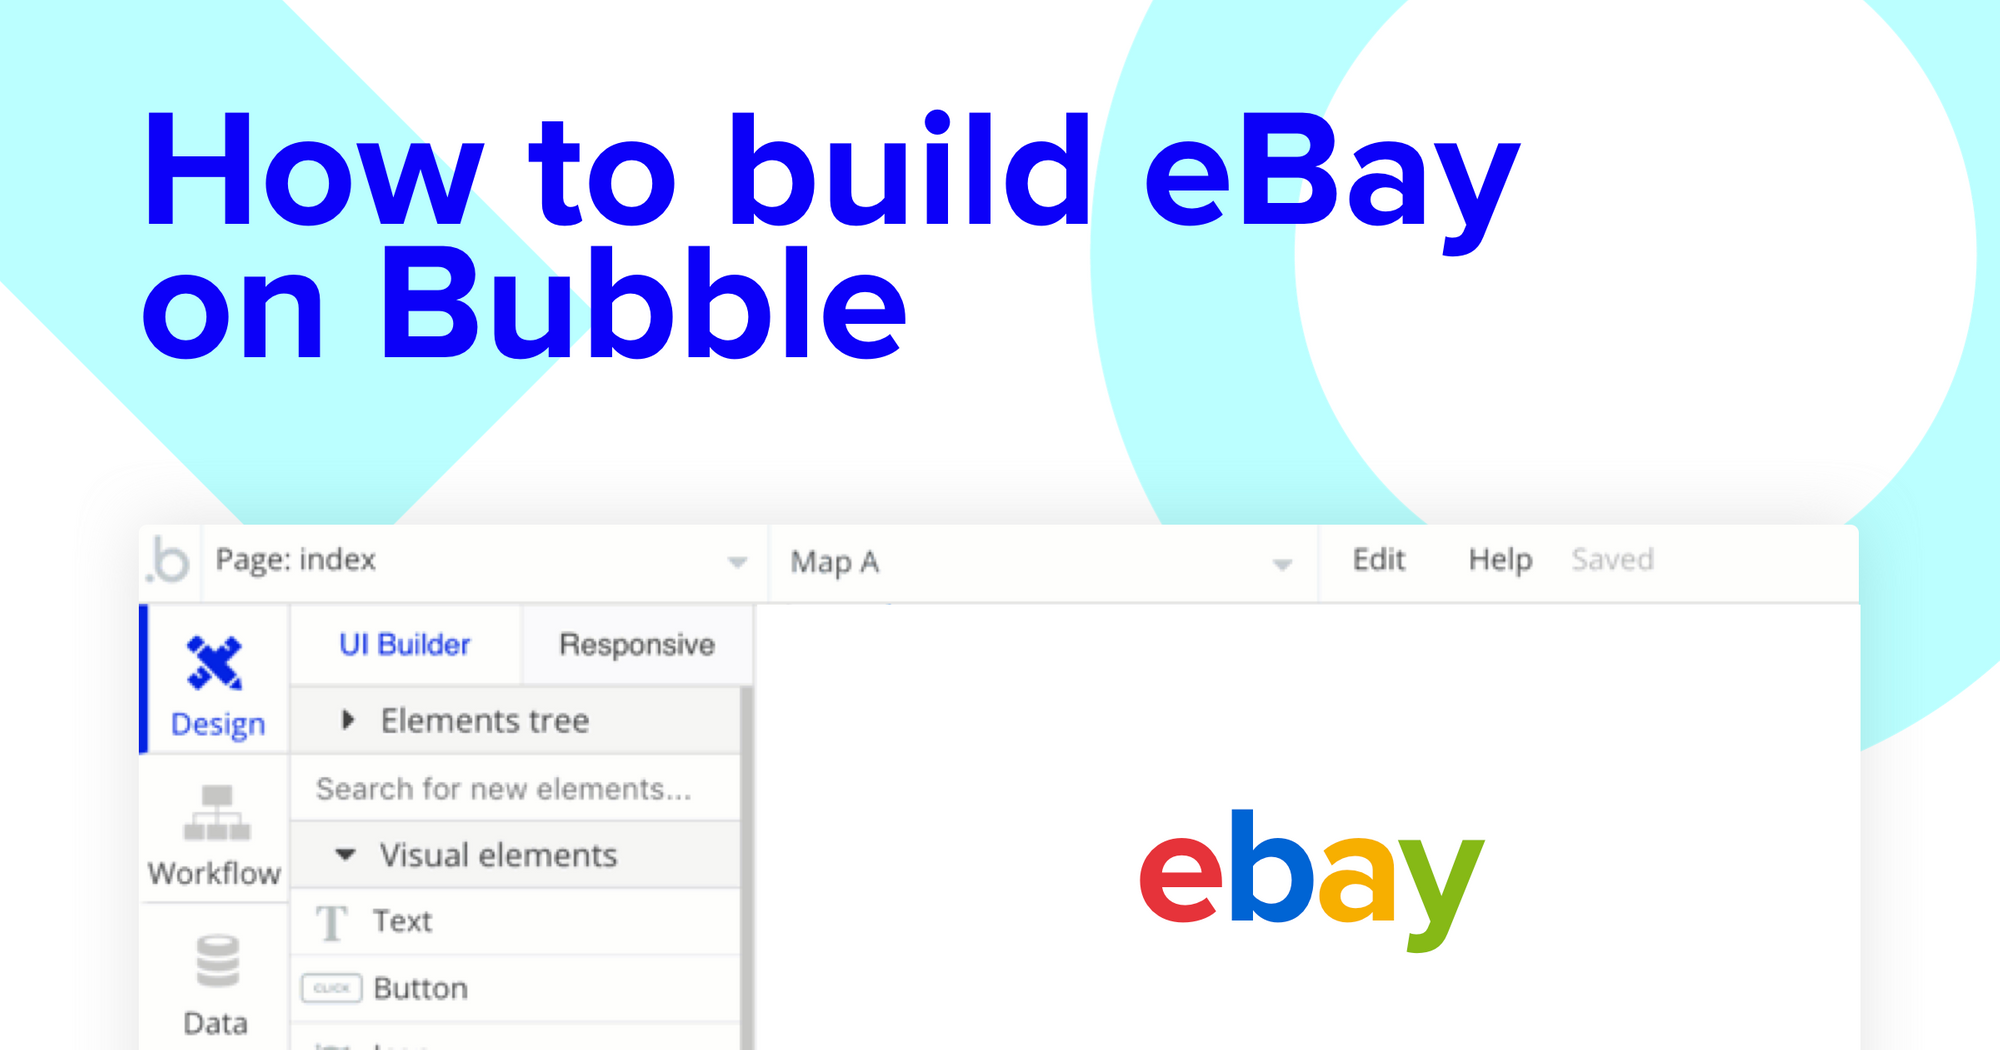 How To Build An eBay Clone Without Code